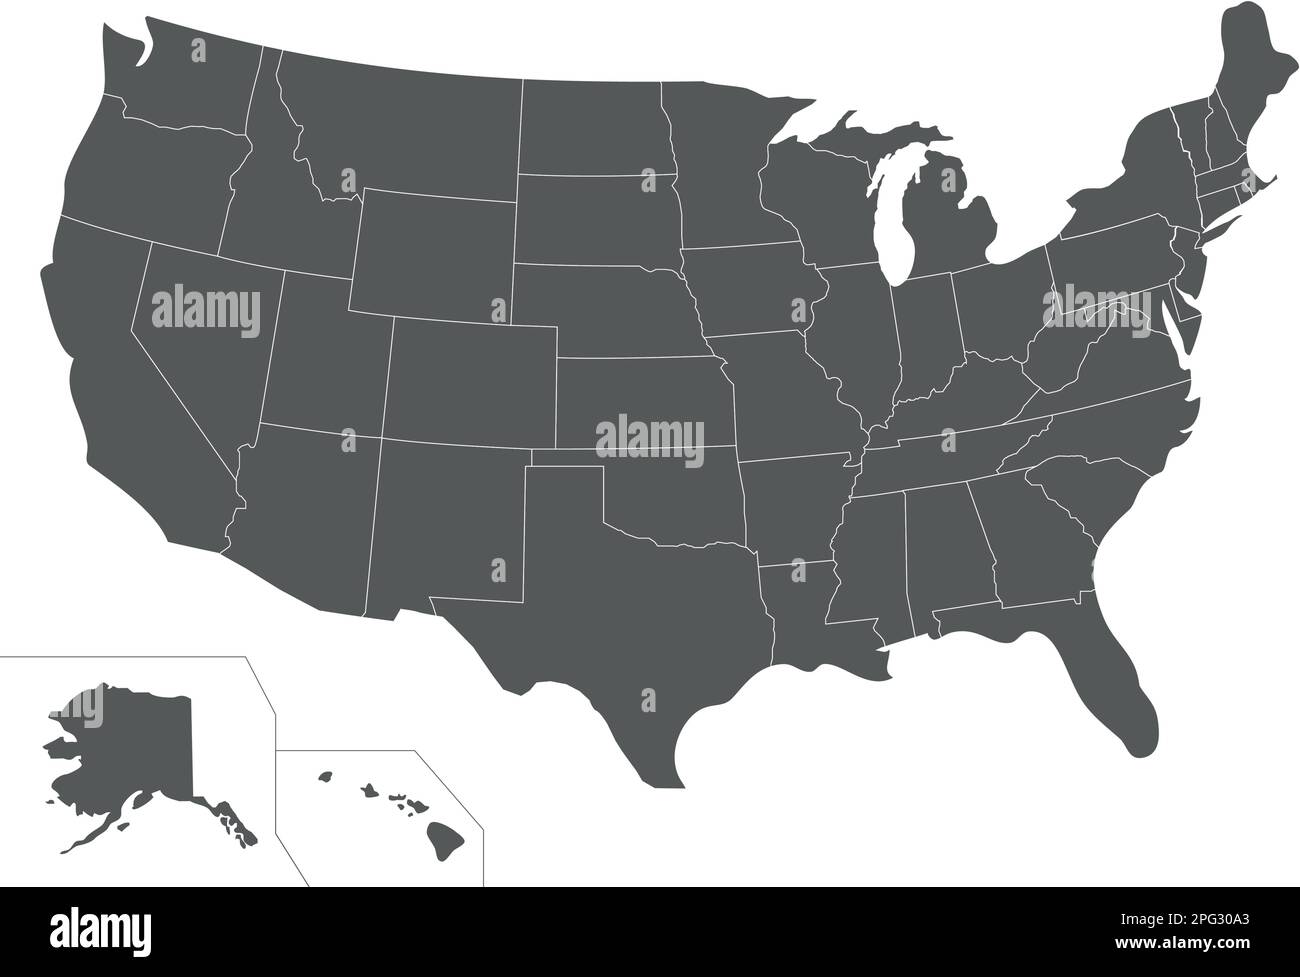 Blank USA Map vector illustration isolated on white background. Editable and clearly labeled layers. Stock Vector